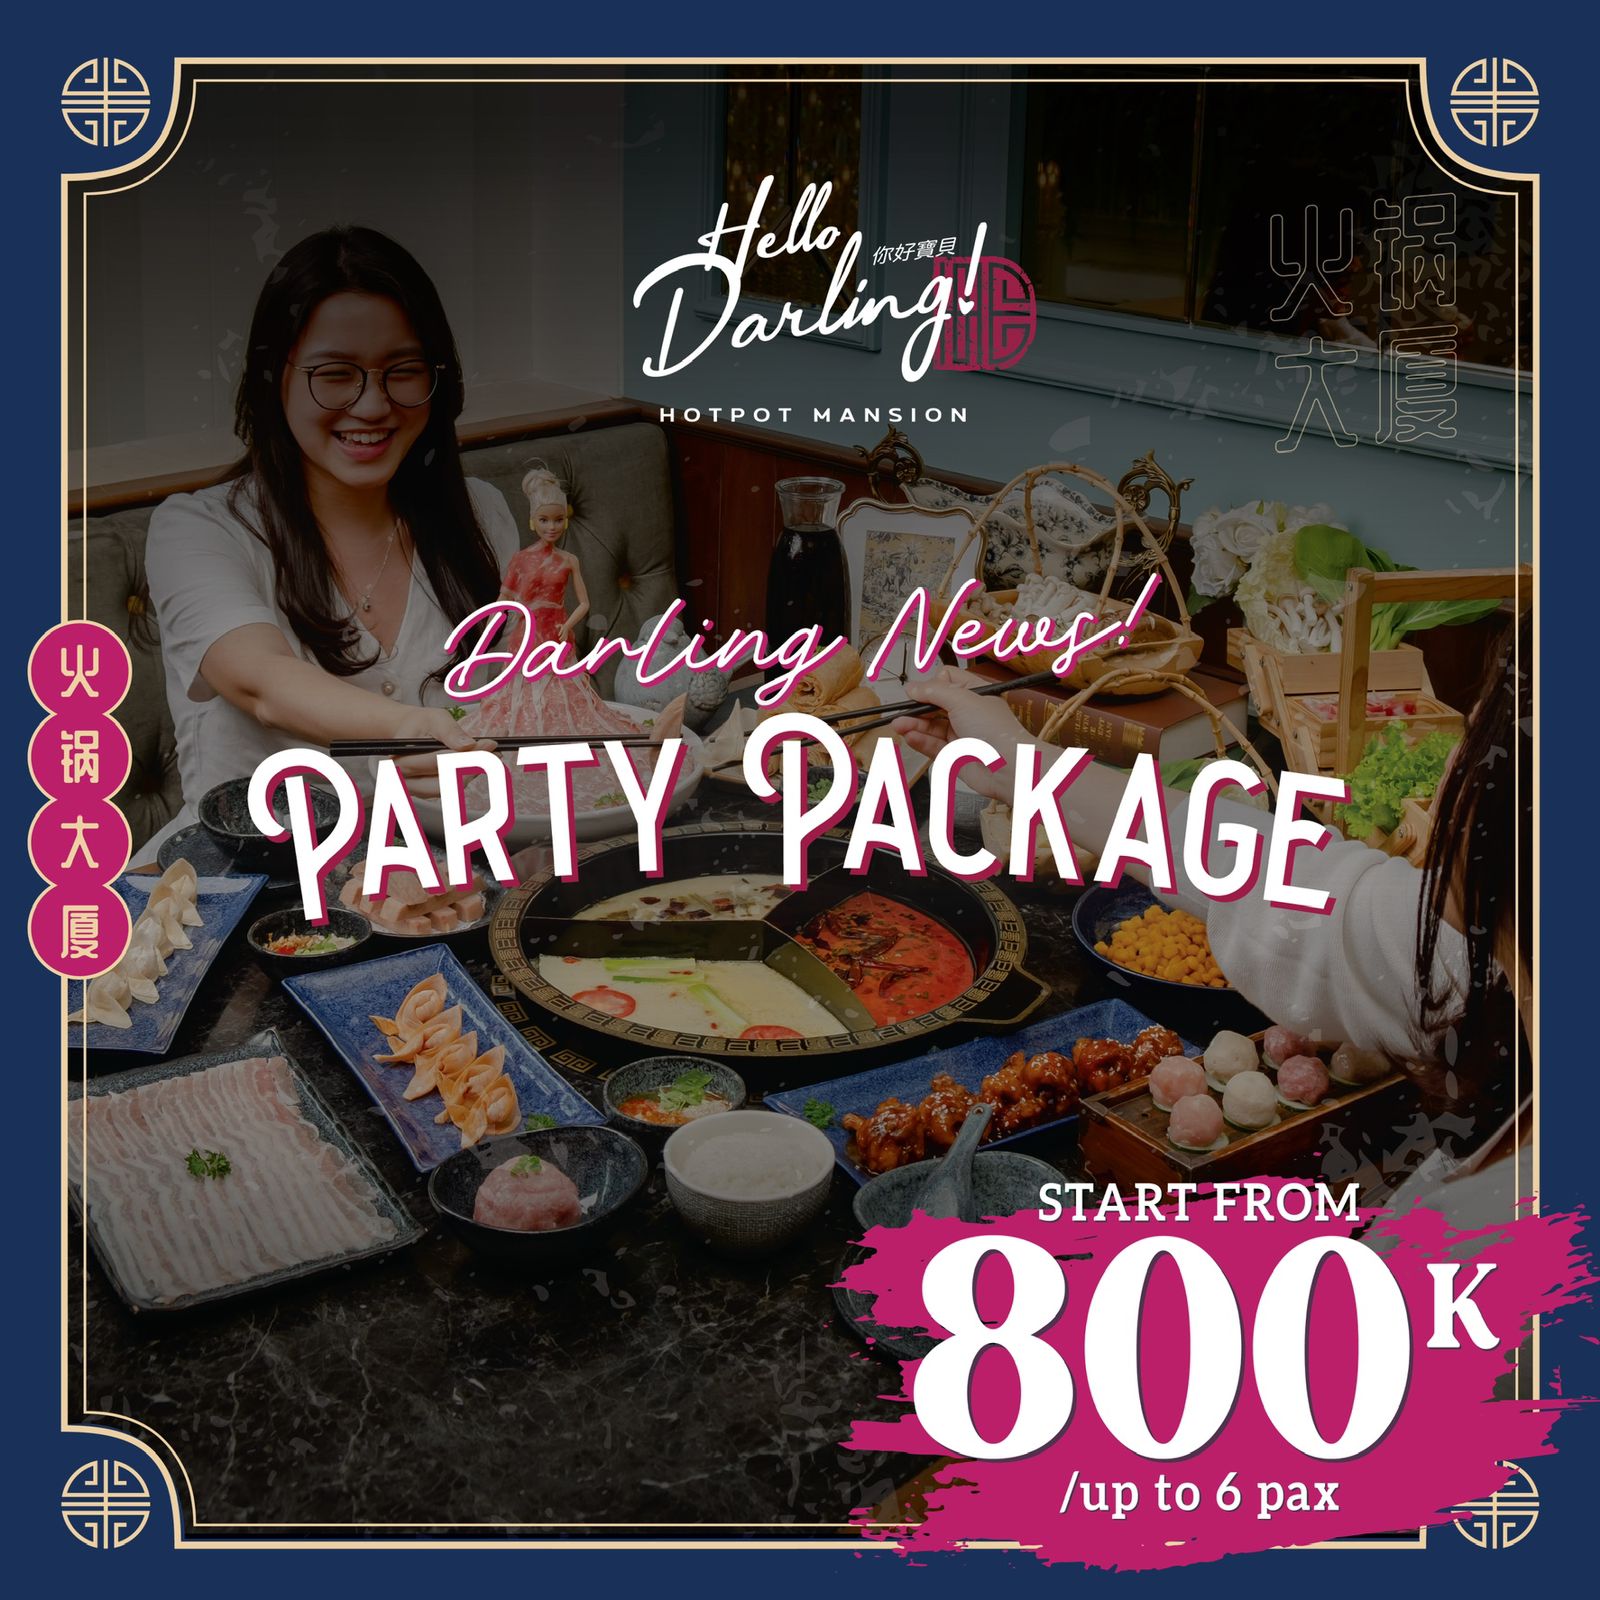 Party Package